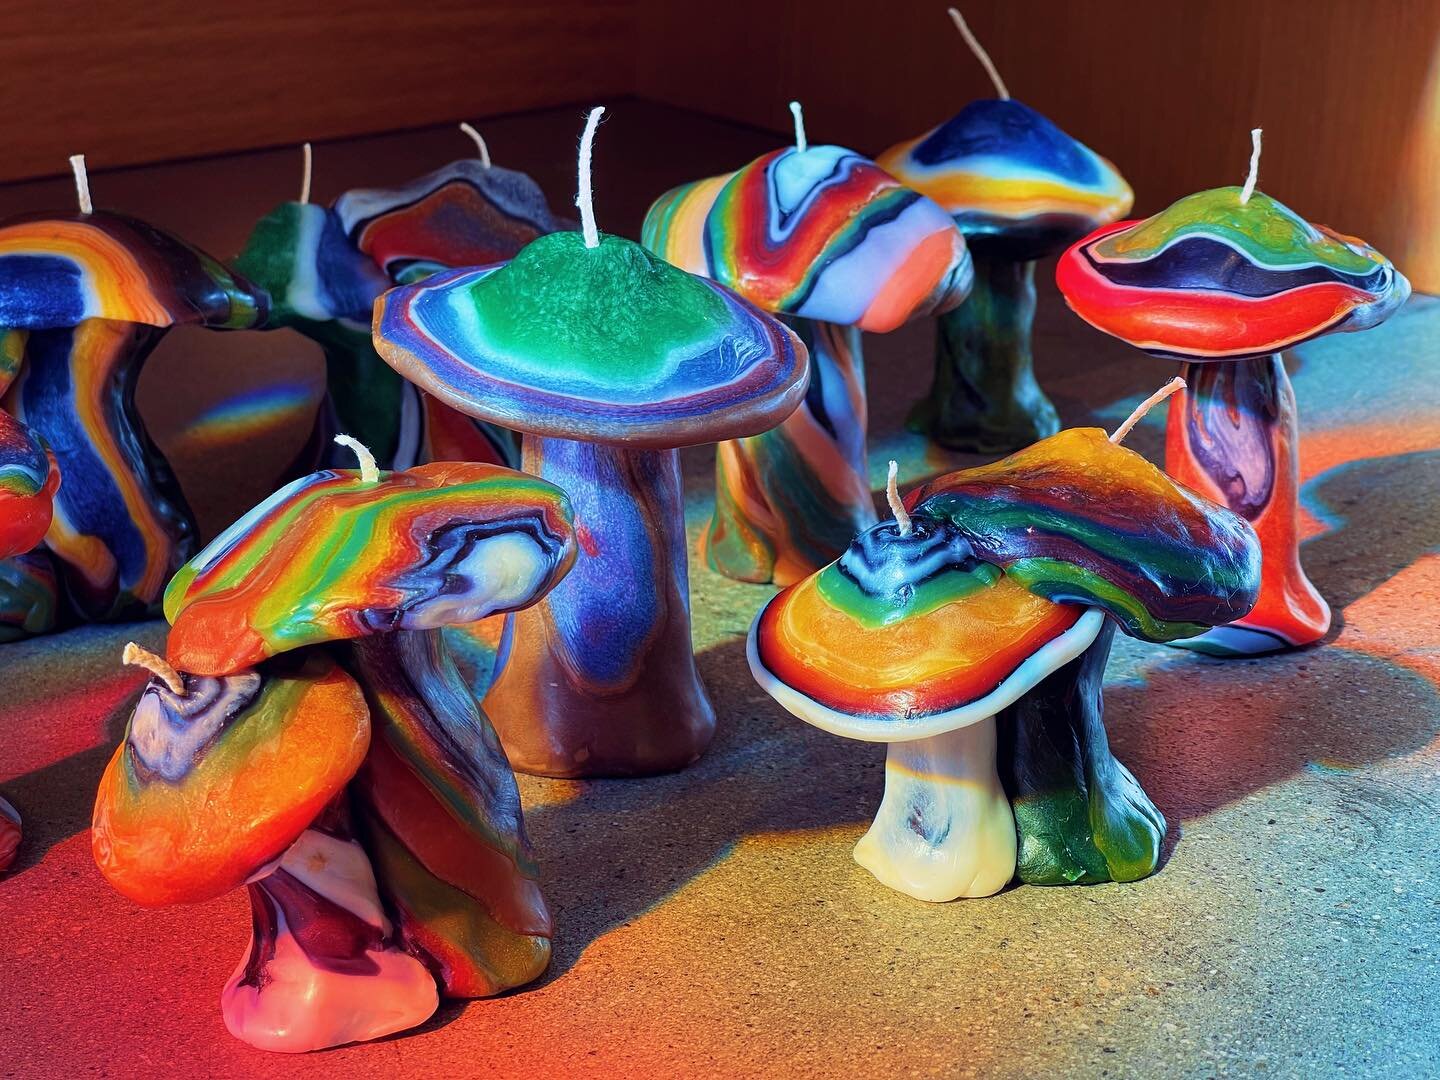 🍄 ᗰᑌSᕼᖇOOᗰ ᑕᗩᑎᗪᒪES 🍄
Hand sculpted rainbow mushroom candles by our friend Susie who has been creating these magical mycelium since the 80s! 

We weren&rsquo;t expecting these to sell so quickly! Only single shroom candles are left at the shop. 🌈🕯